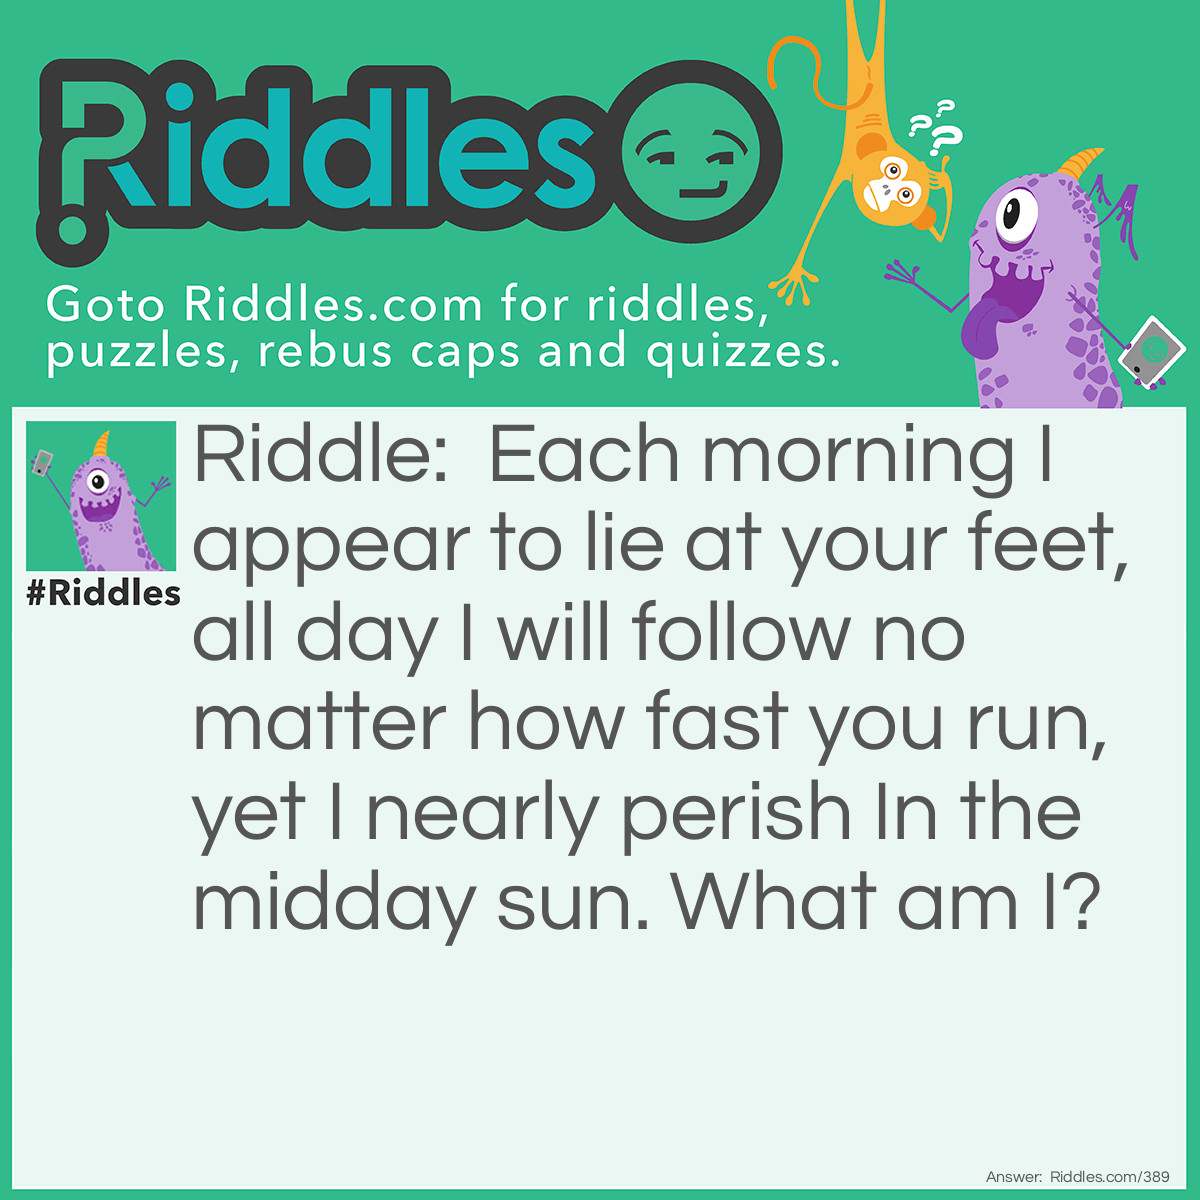 Riddle: Each morning I appear to lie at your feet, all day I will follow no matter how fast you run, yet I nearly perish In the midday sun. What am I? Answer: Your shadow.